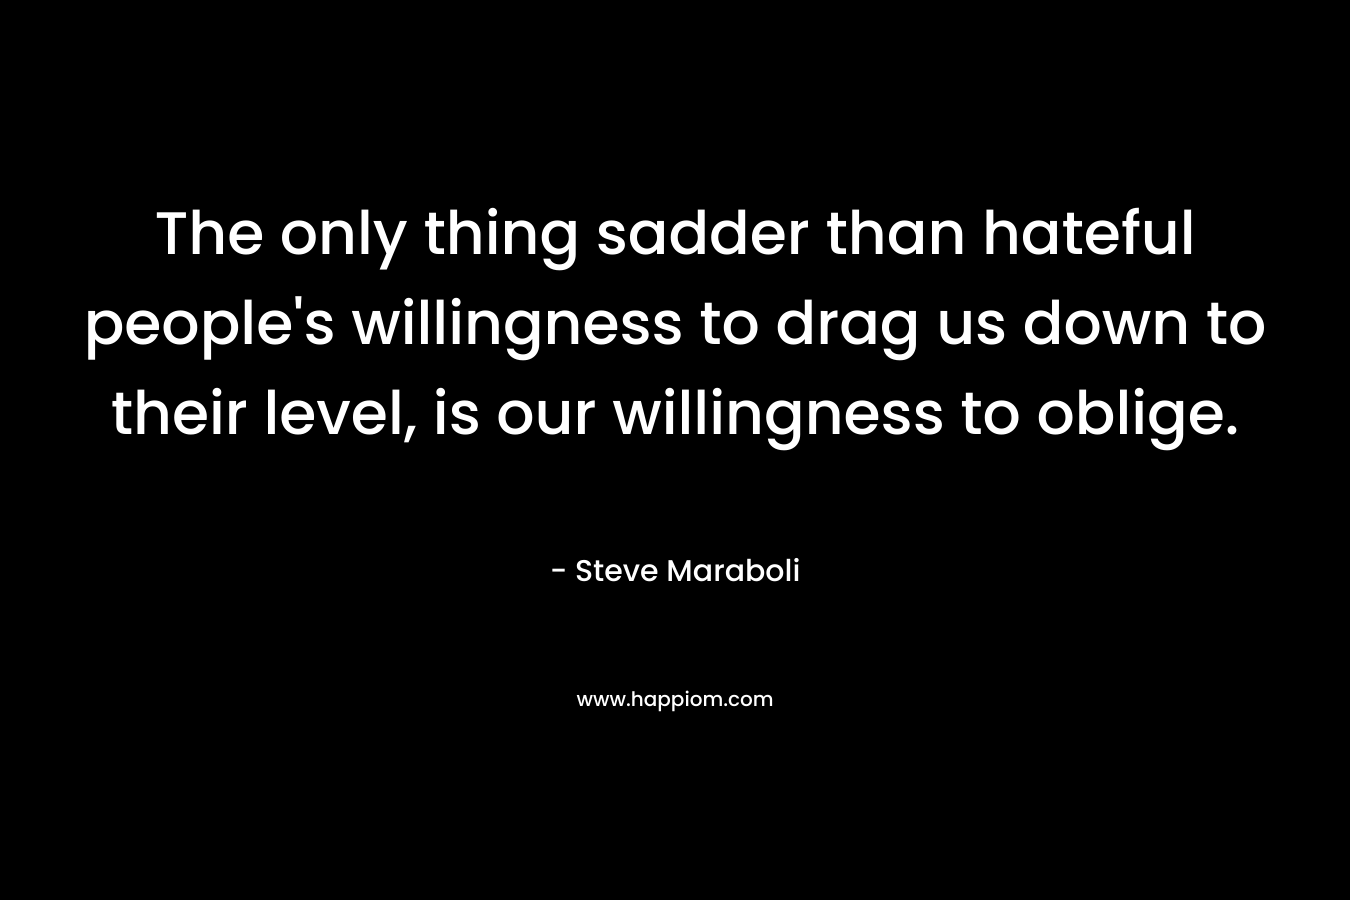 The only thing sadder than hateful people’s willingness to drag us down to their level, is our willingness to oblige. – Steve Maraboli